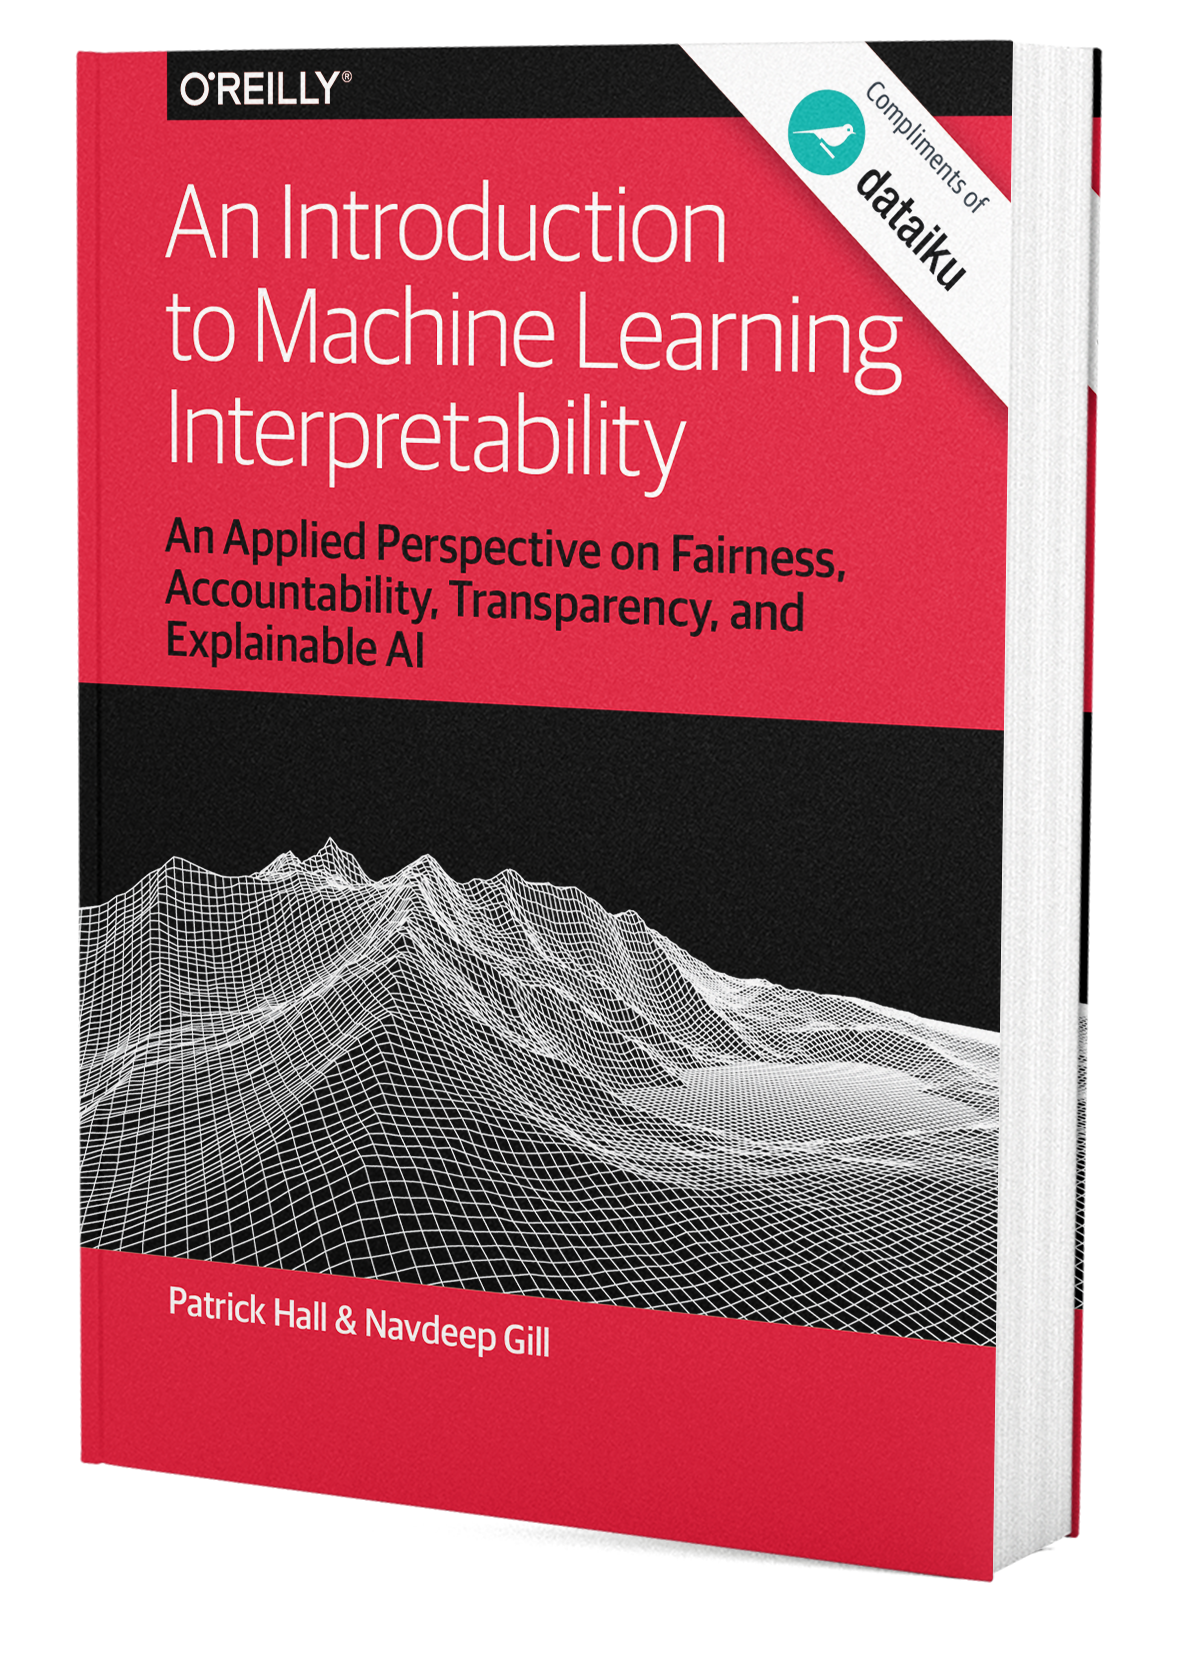 DAT_OReilly-Dataiku-Intro+to+ML+Learning+Interpretability_3D+Book+Mockup